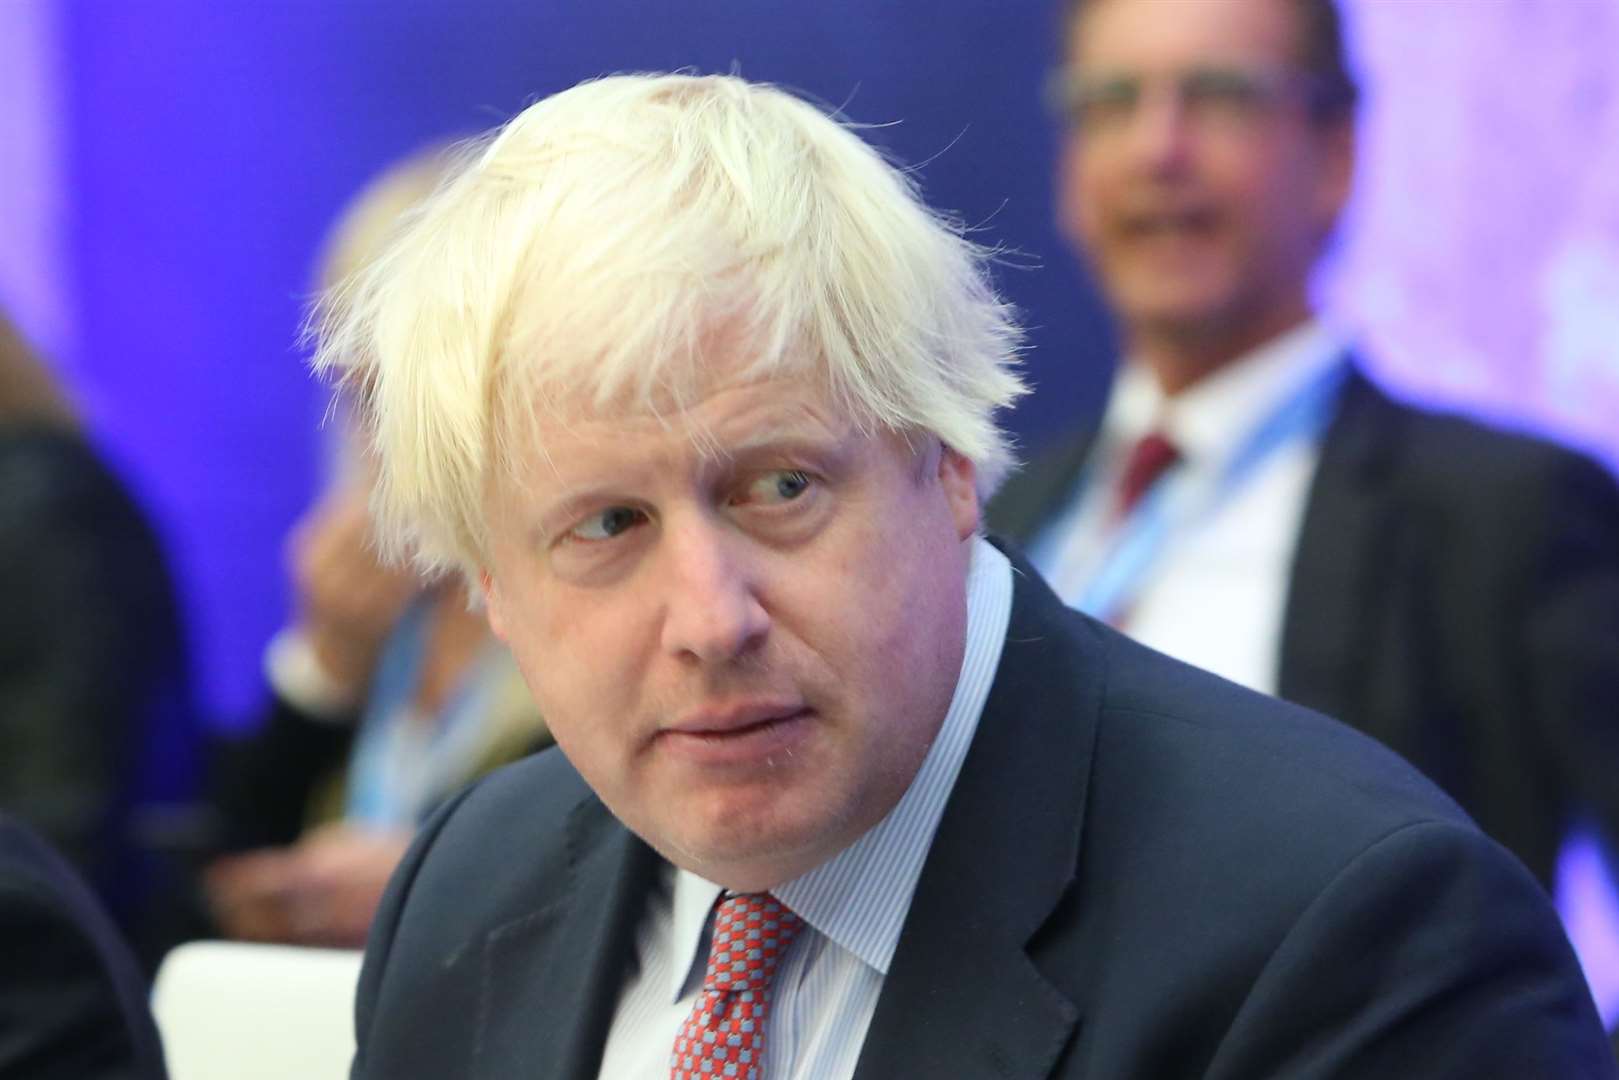 Boris Johnson has caused fury in Kent's Tory shires over his handling of the Owen Paterson lobbying scandal